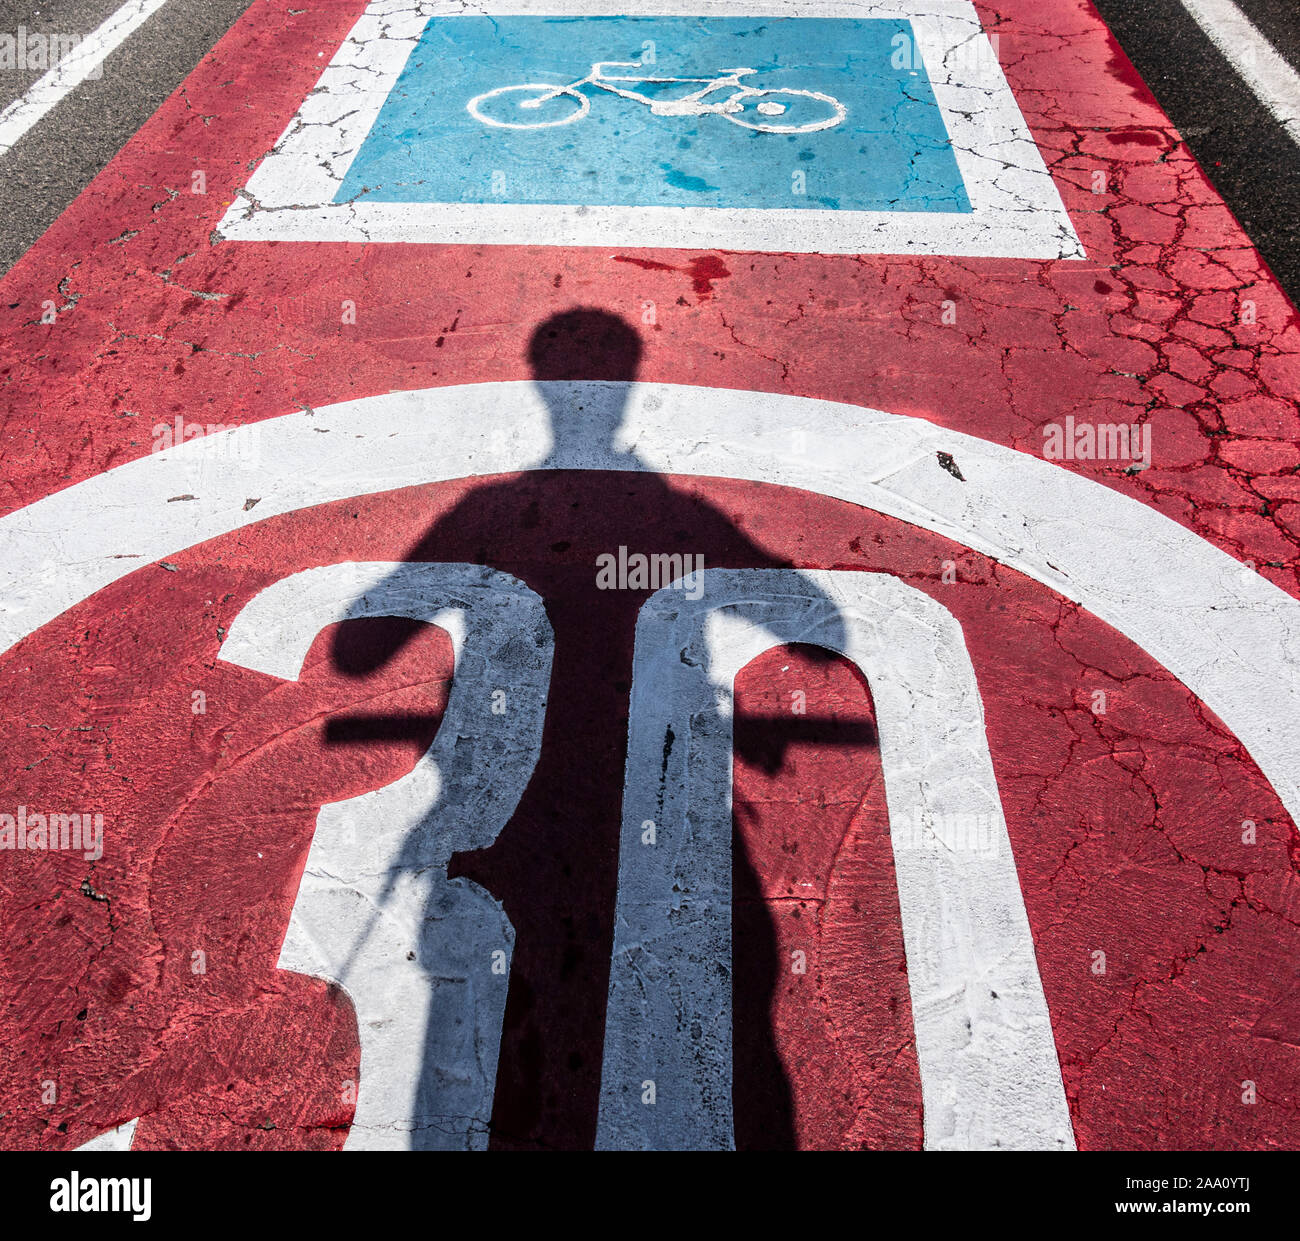 Road markings warning motorists that road is also used by cyclists. Stock Photo